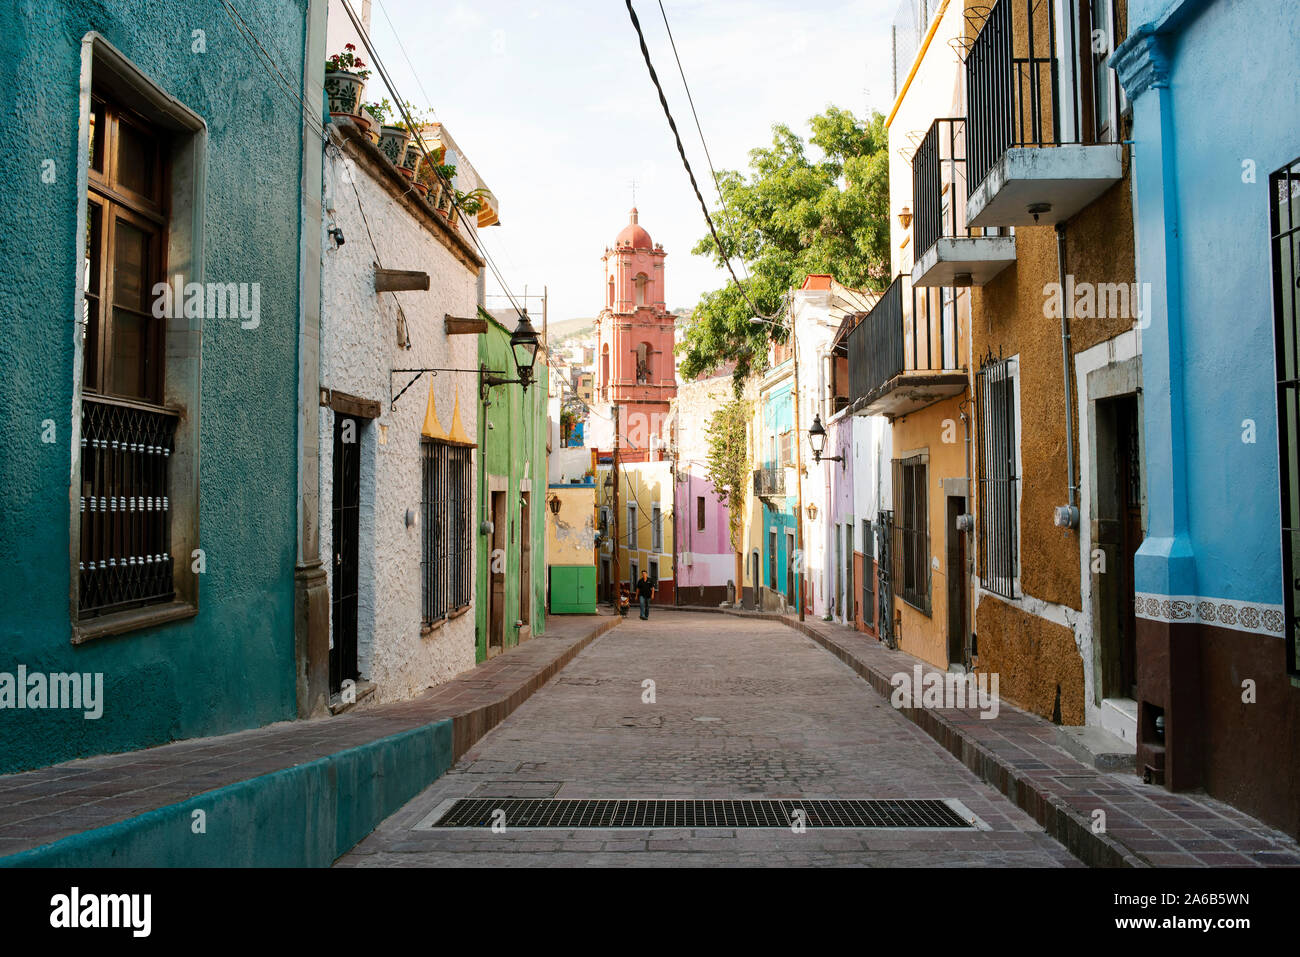 Street view of colourful houses in the historic centre of Guanajuato, Mexico. Jun 2019 Stock Photo